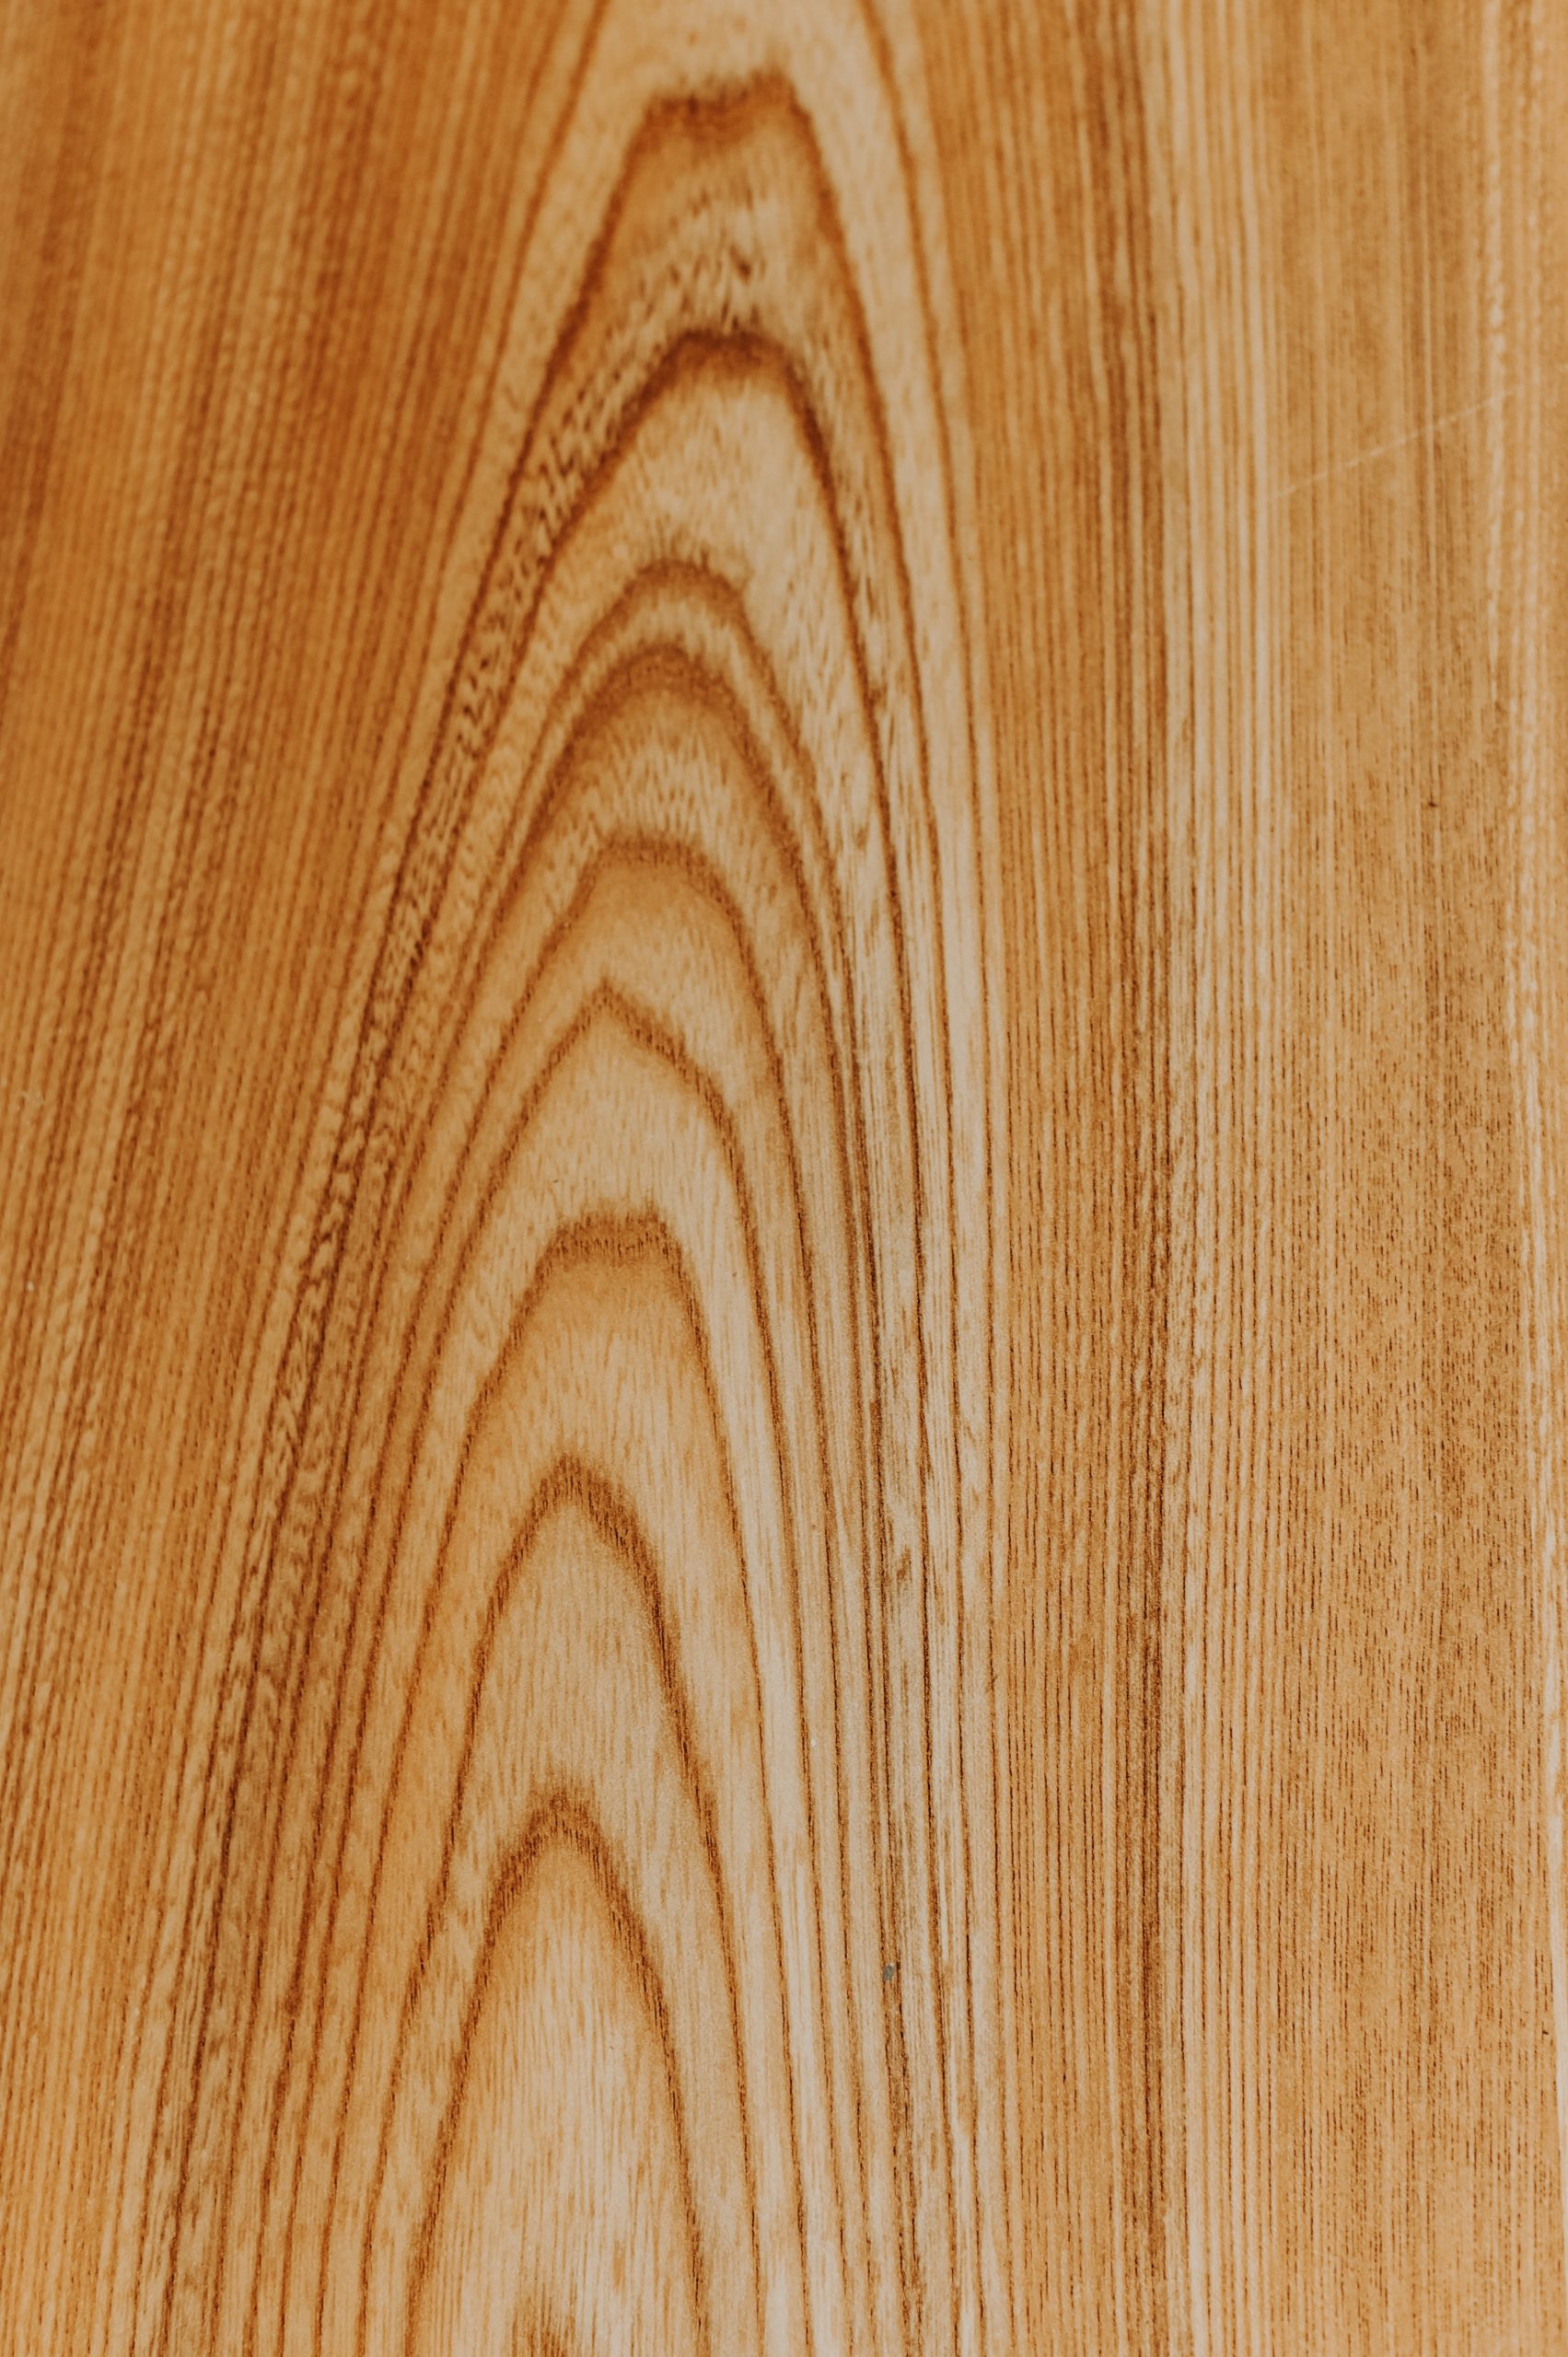 Wood Panel iPhone Wallpapers Free Download